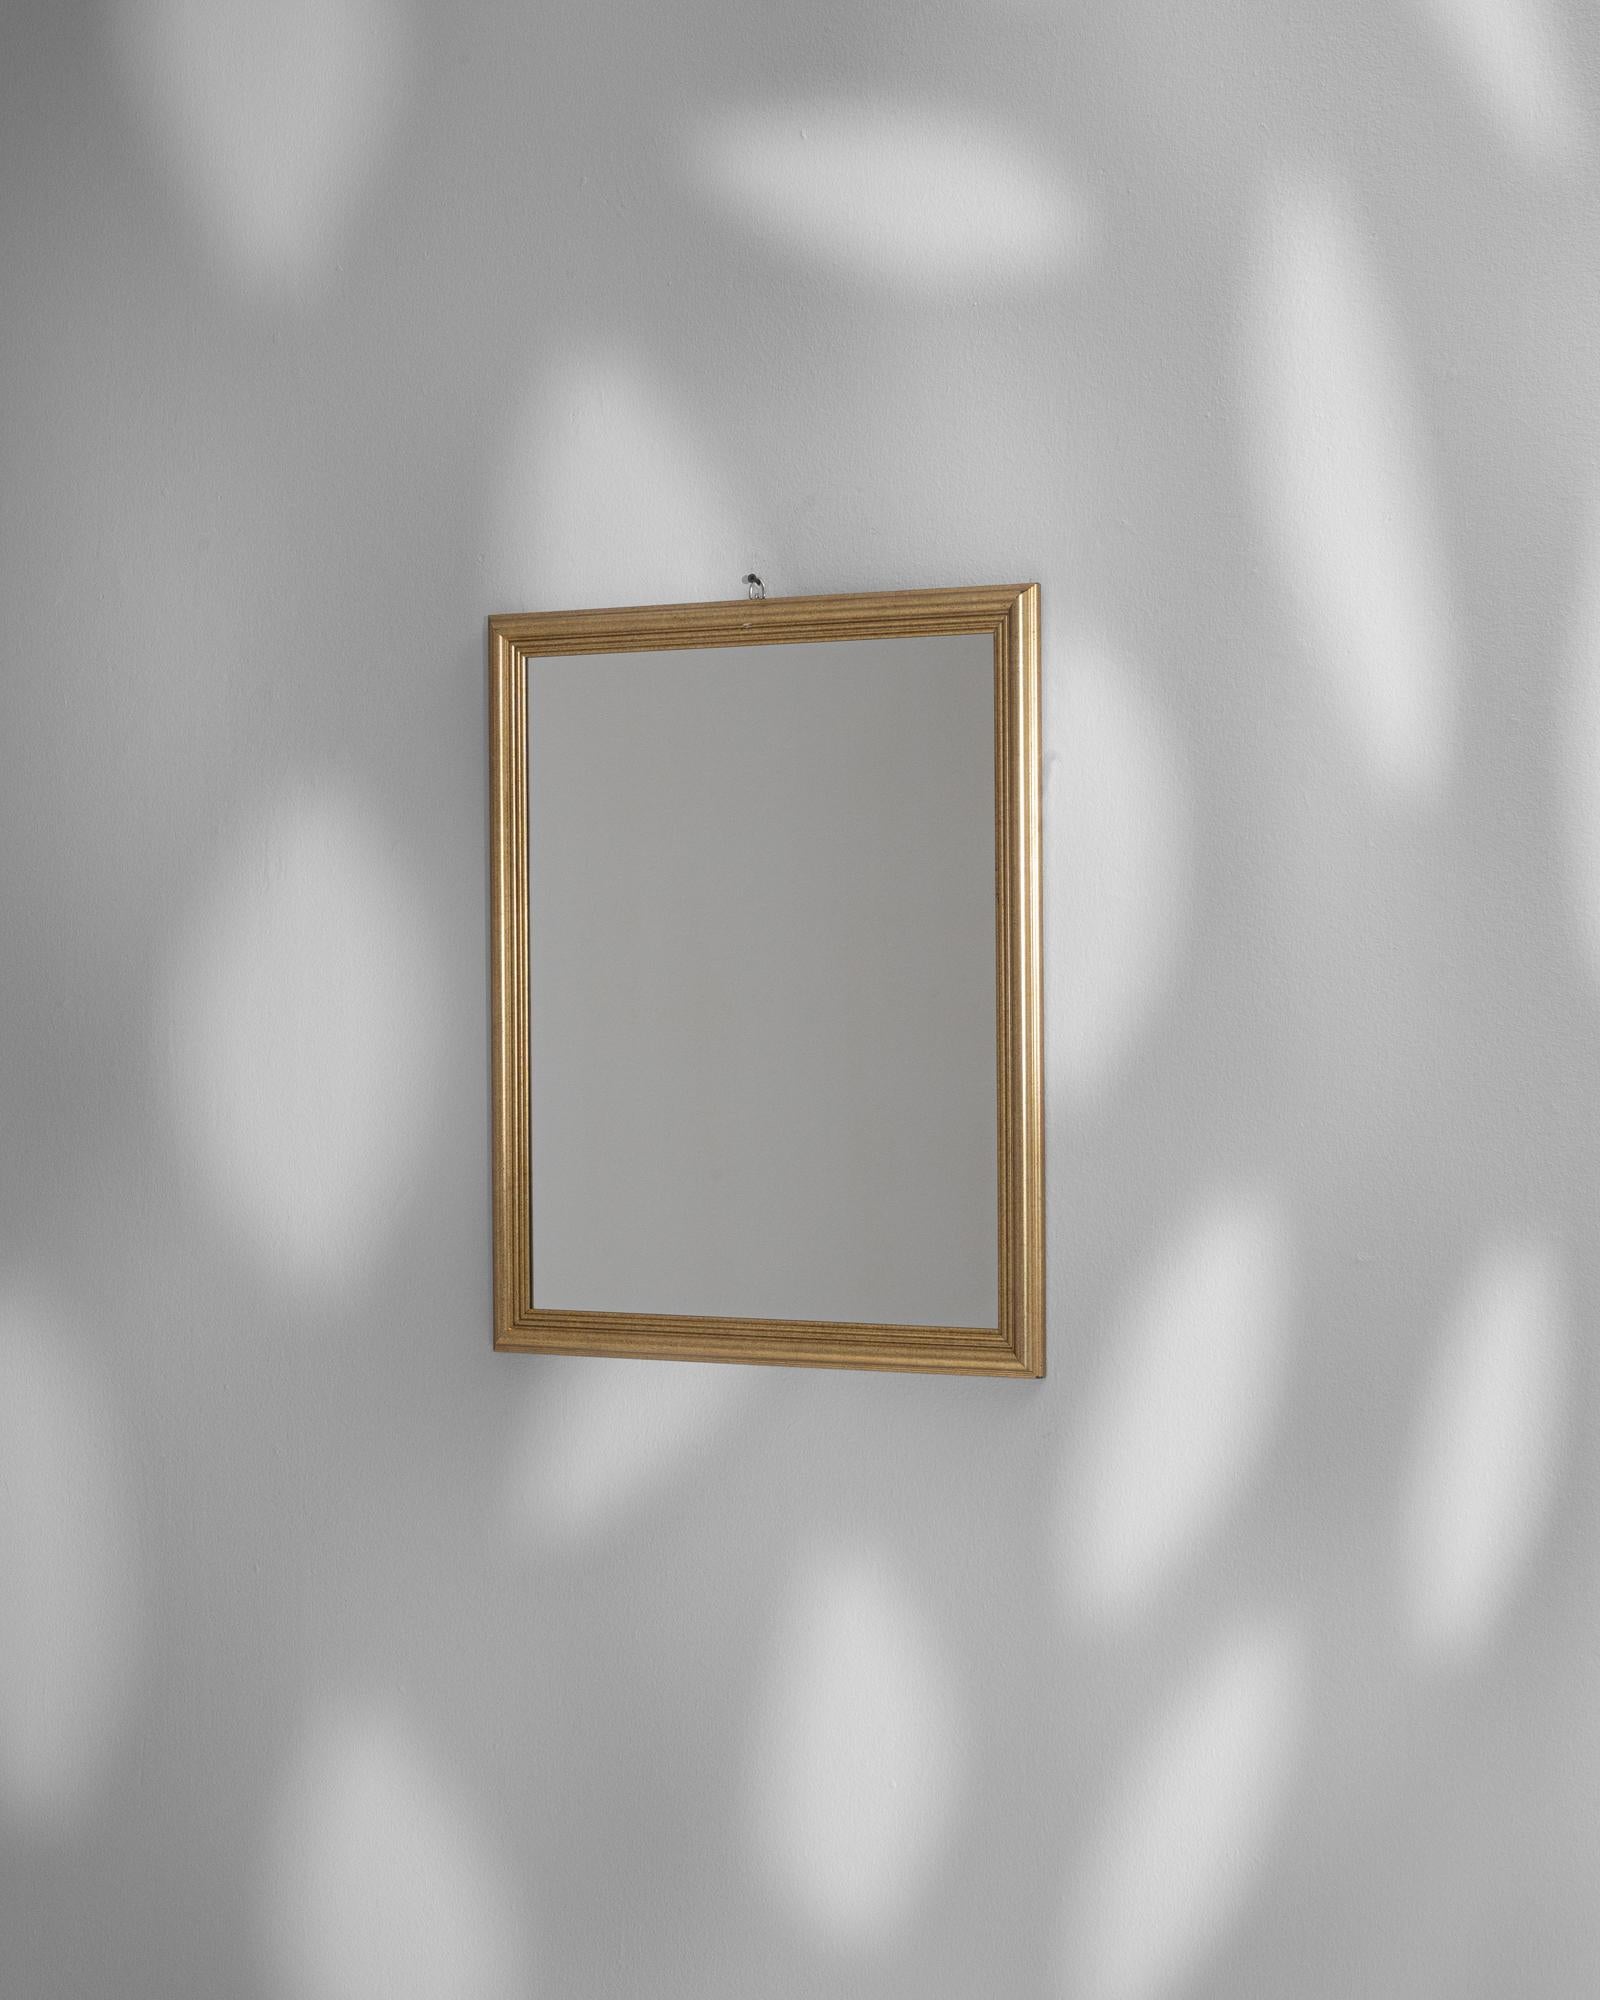 20th Century French Gilded Wood Mirror For Sale 3